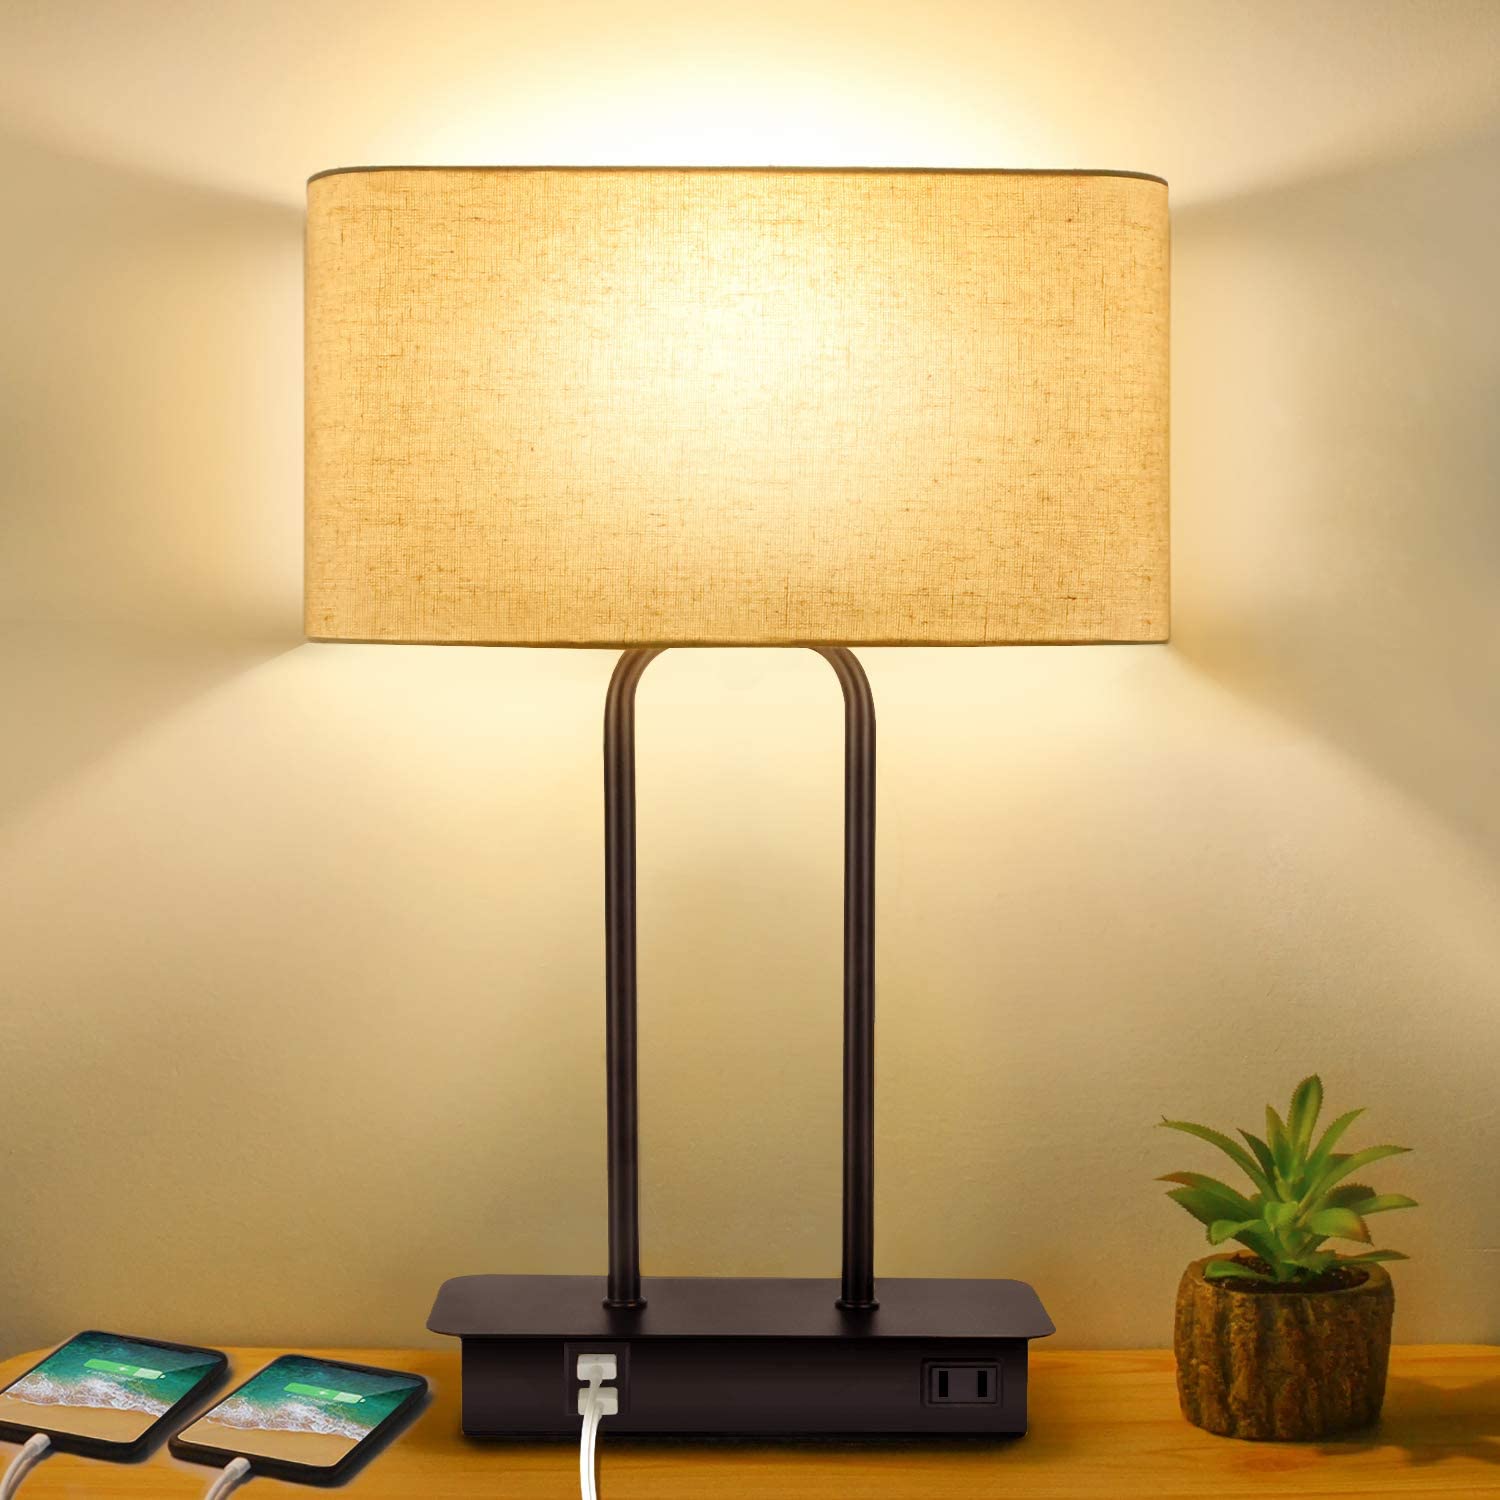 3-Way Dimmable Touch Control Table Lamp with 2 USB Ports and AC Power